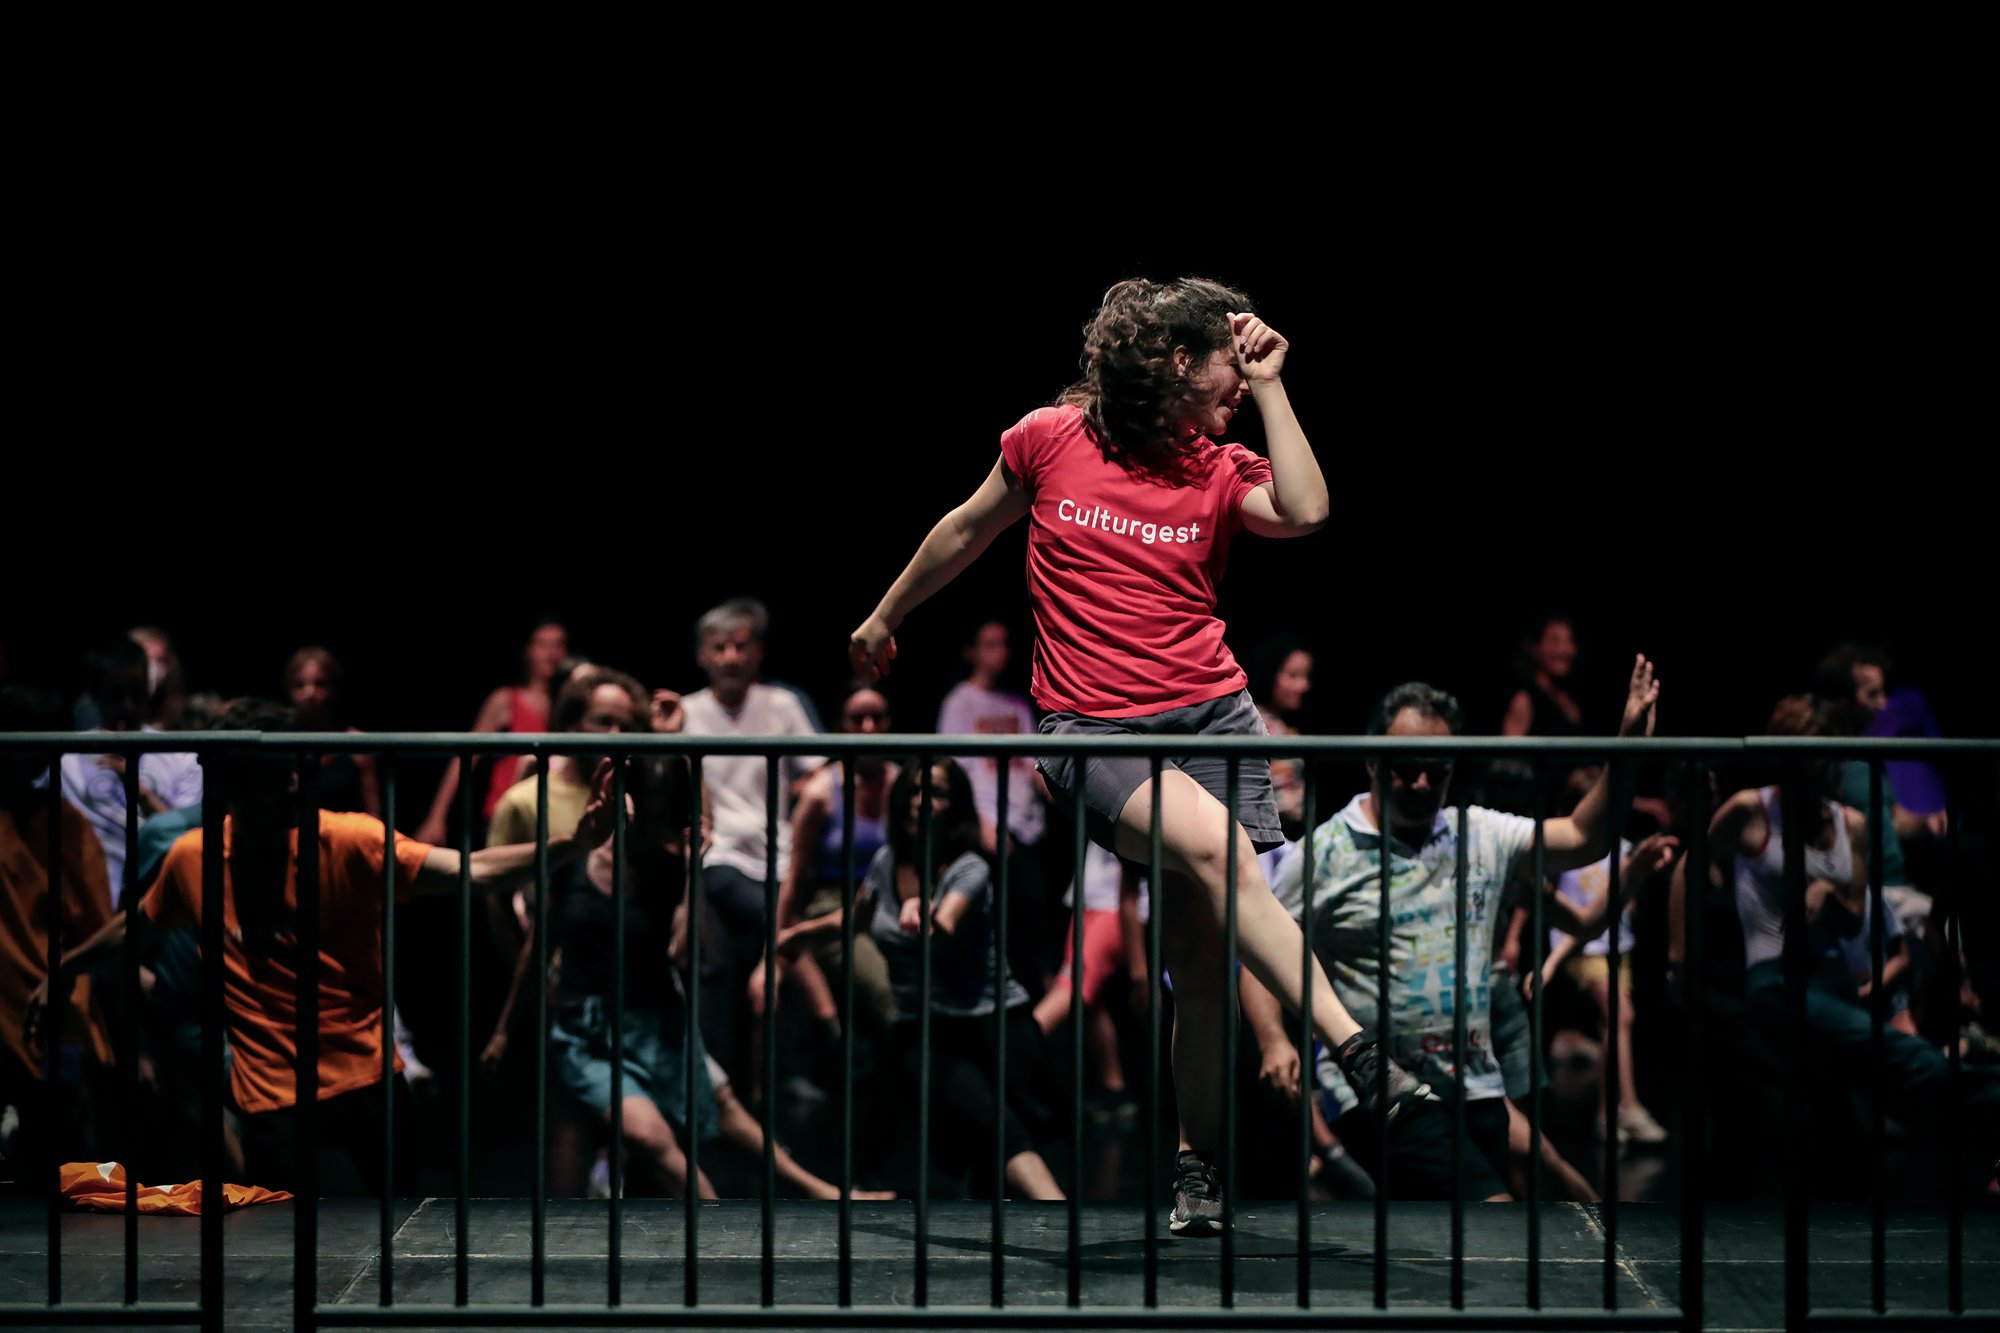 BAL MODERNE | INSIDE OUT | 3 JUL 2022
We closed the second edition of Inside Out learning three choreographies, in an informal and festive way. Bal Moderne will be back next season to share more dance moments like these.
Photography by Bruno Simão - Culturgest